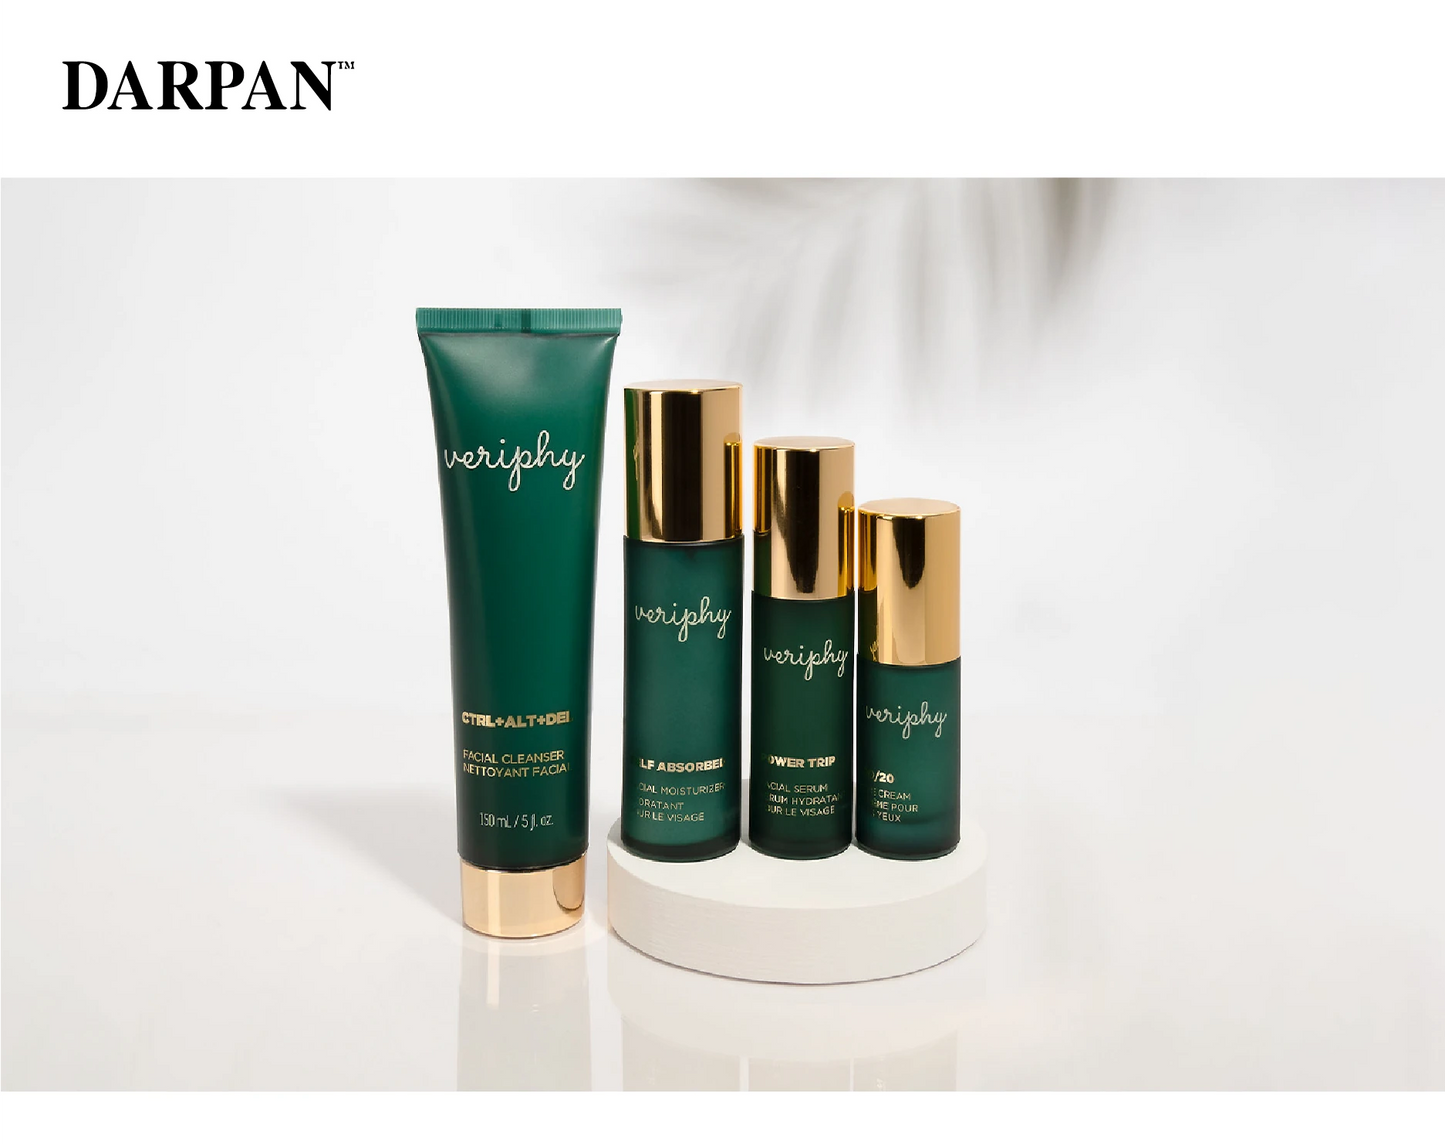 Veriphy Skincare featured in Darpan Magazine 